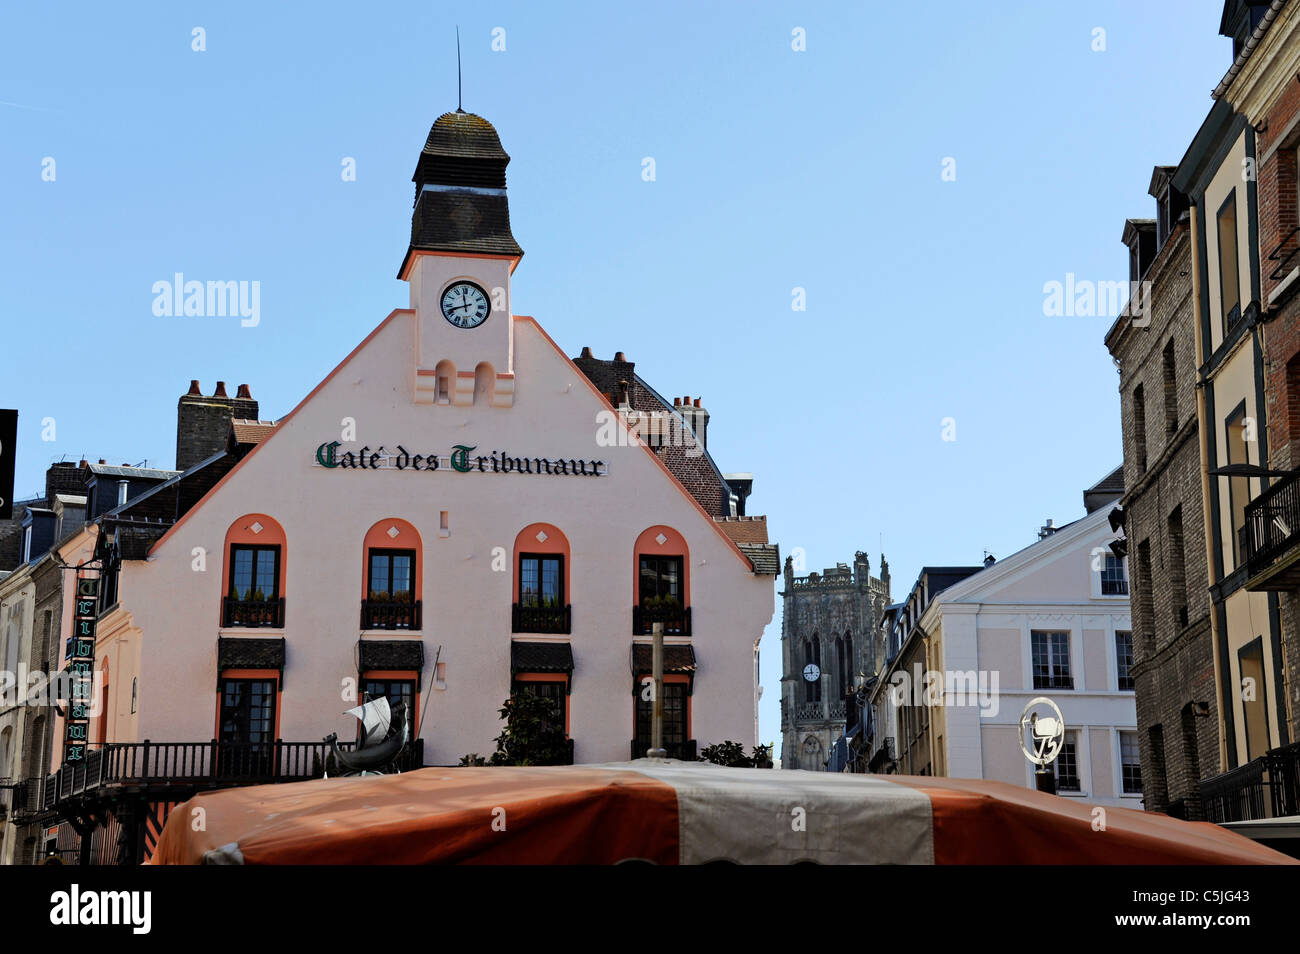 Market in old town,Cafe des Tribunaux,Dieppe,Seine -Maritime,Normandy,France Stock Photo